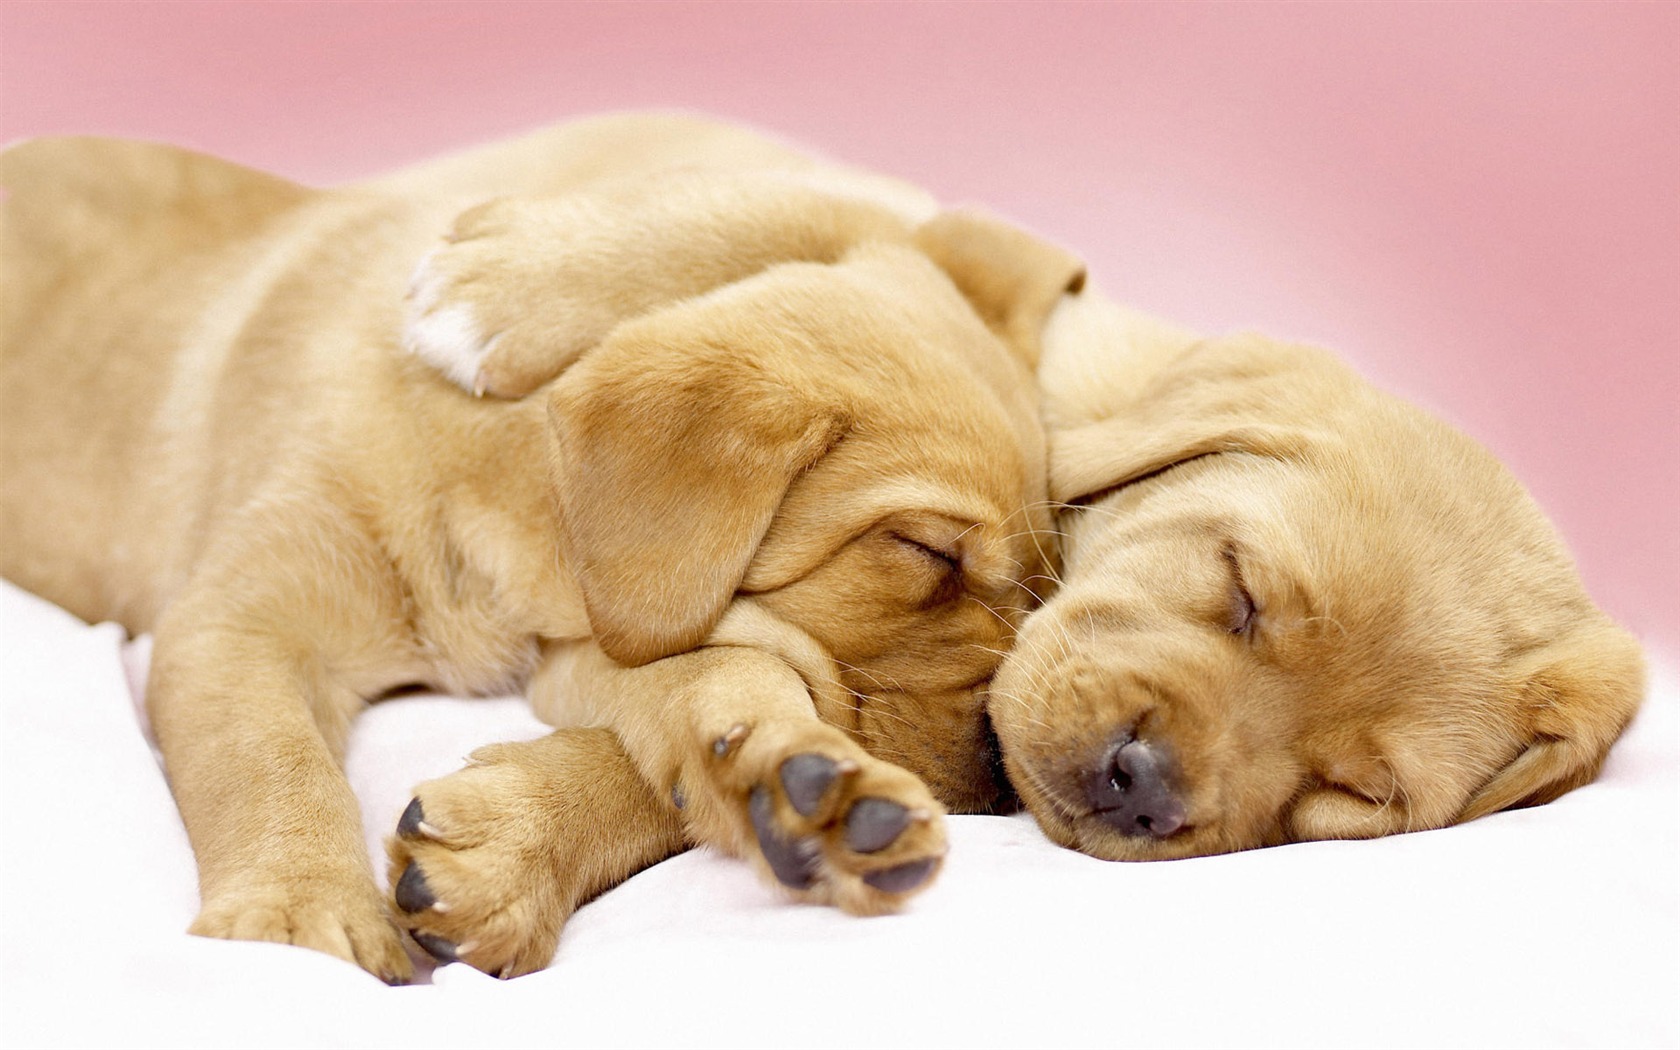 Puppy Photo HD wallpapers (7) #1 - 1680x1050